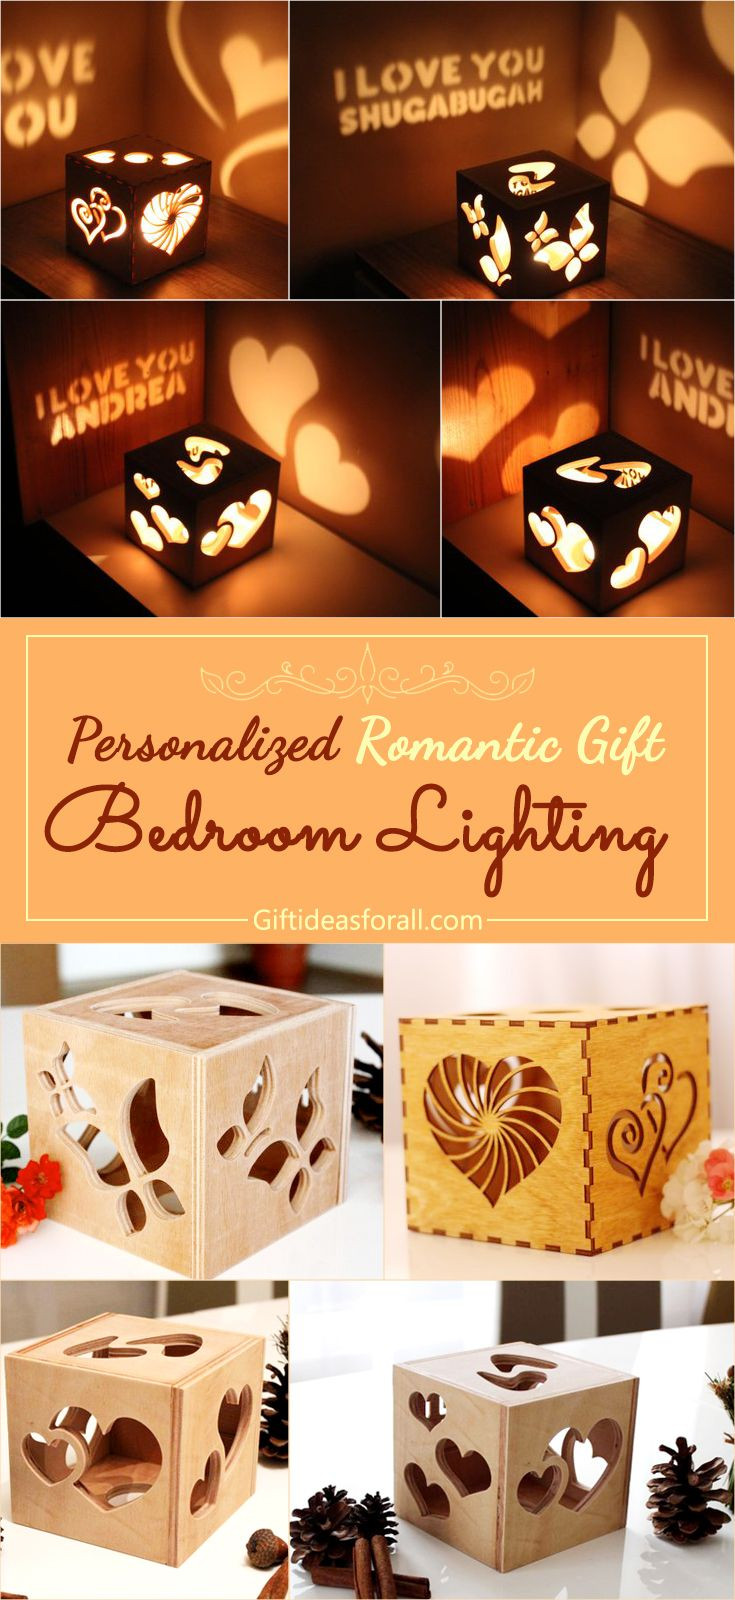 Girlfriend Gift Ideas Birthday
 Personalized romantic bedroom lighting Gifts Giftideas